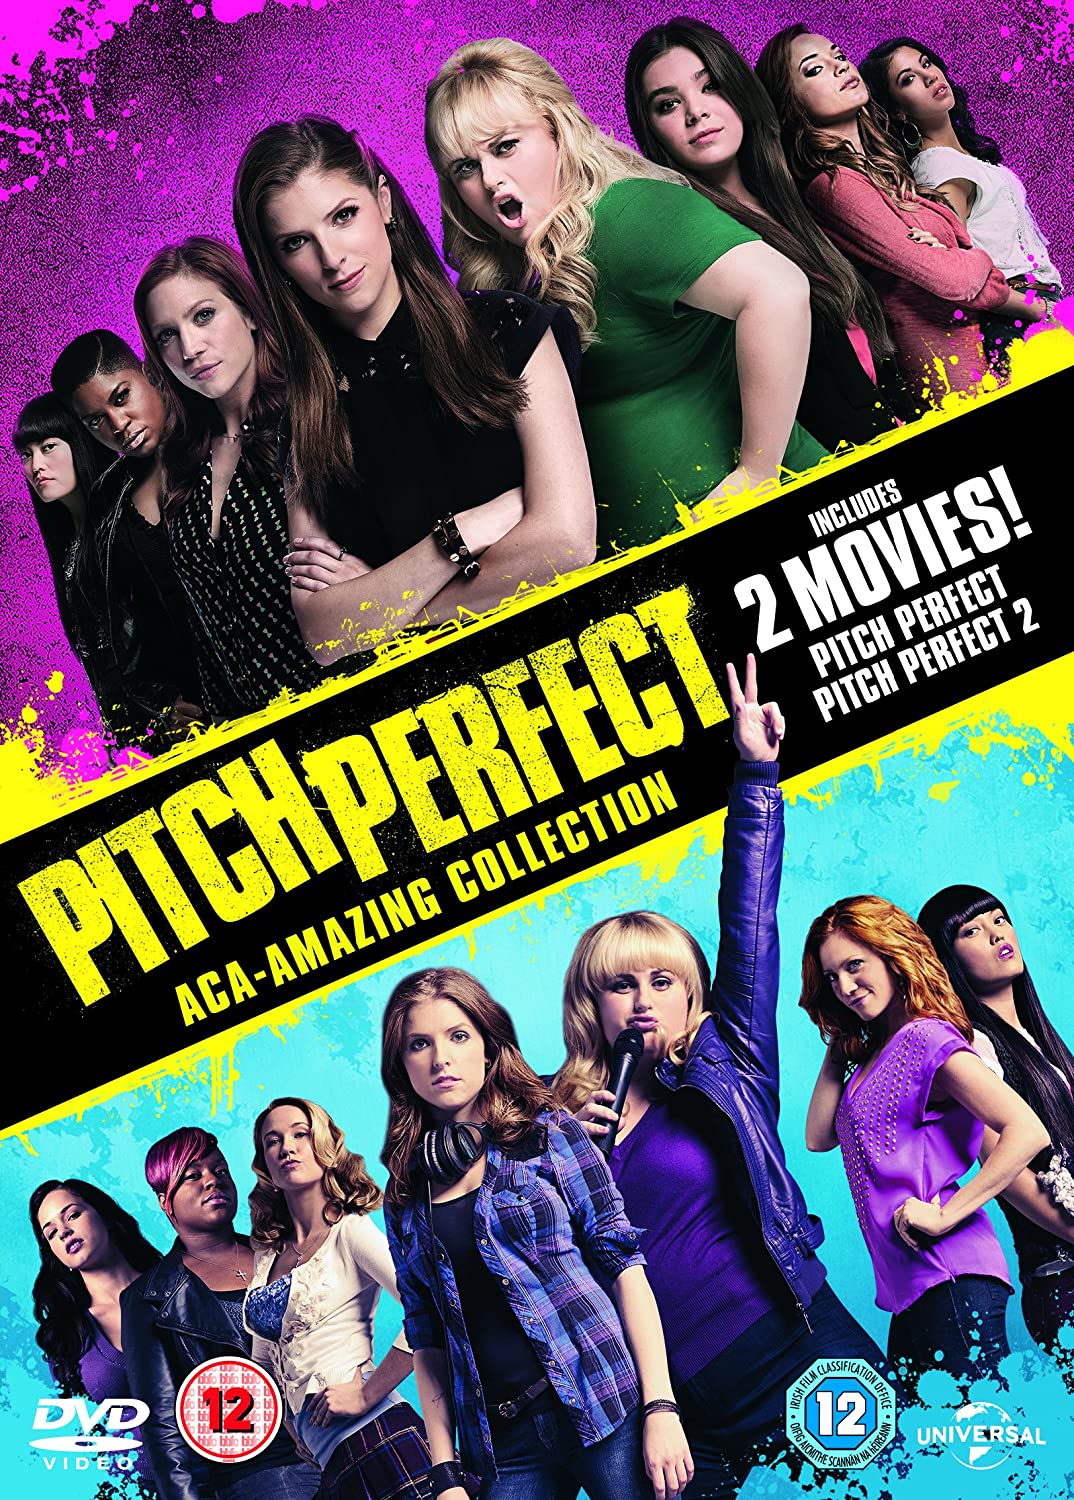 Pitch Perfect 2 Film Collection [2015] (DVD)